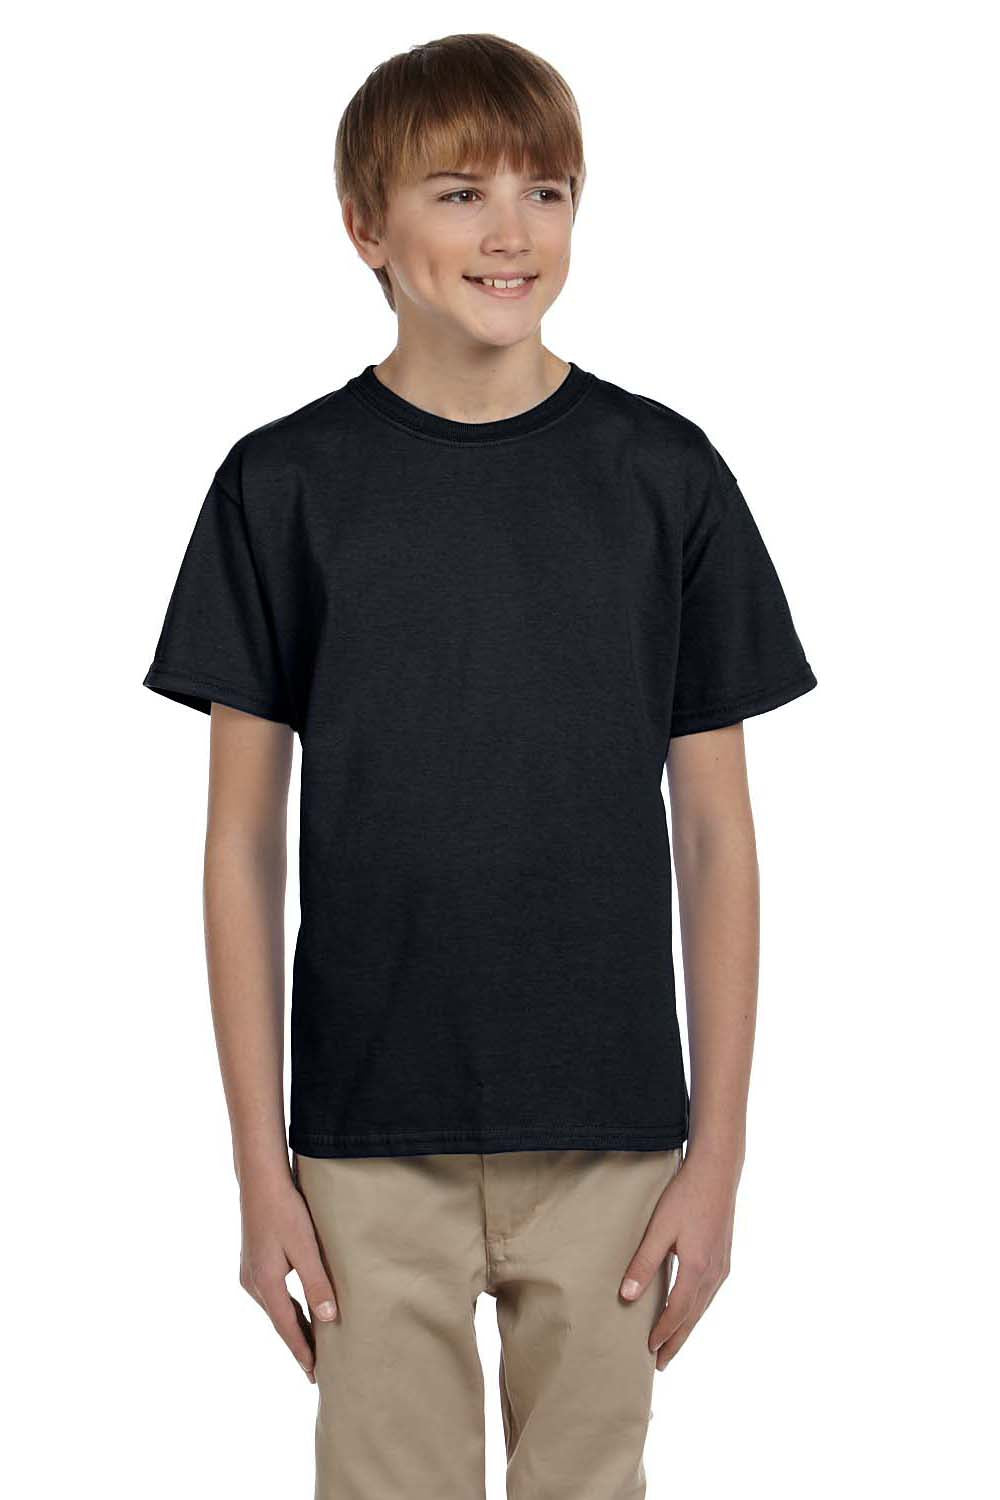 Fruit Of The Loom 3931B Youth HD Jersey Short Sleeve Crewneck T-Shirt Black Front